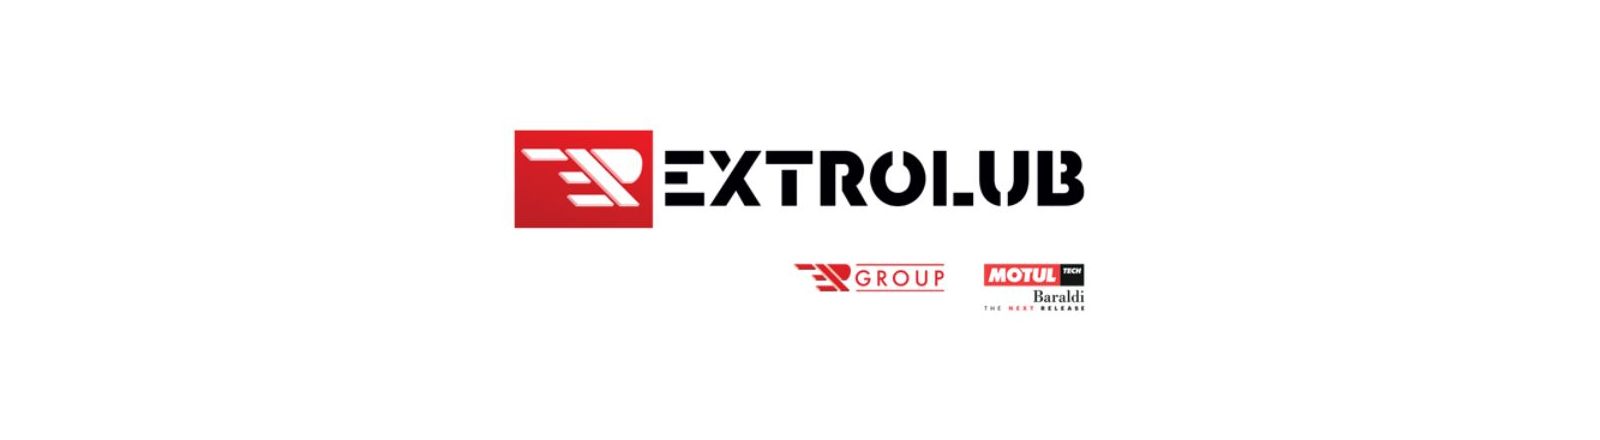 PRESEZZI EXTRUSION EXTENDS THE RANGE OF EXTROLUB PRODUCTS